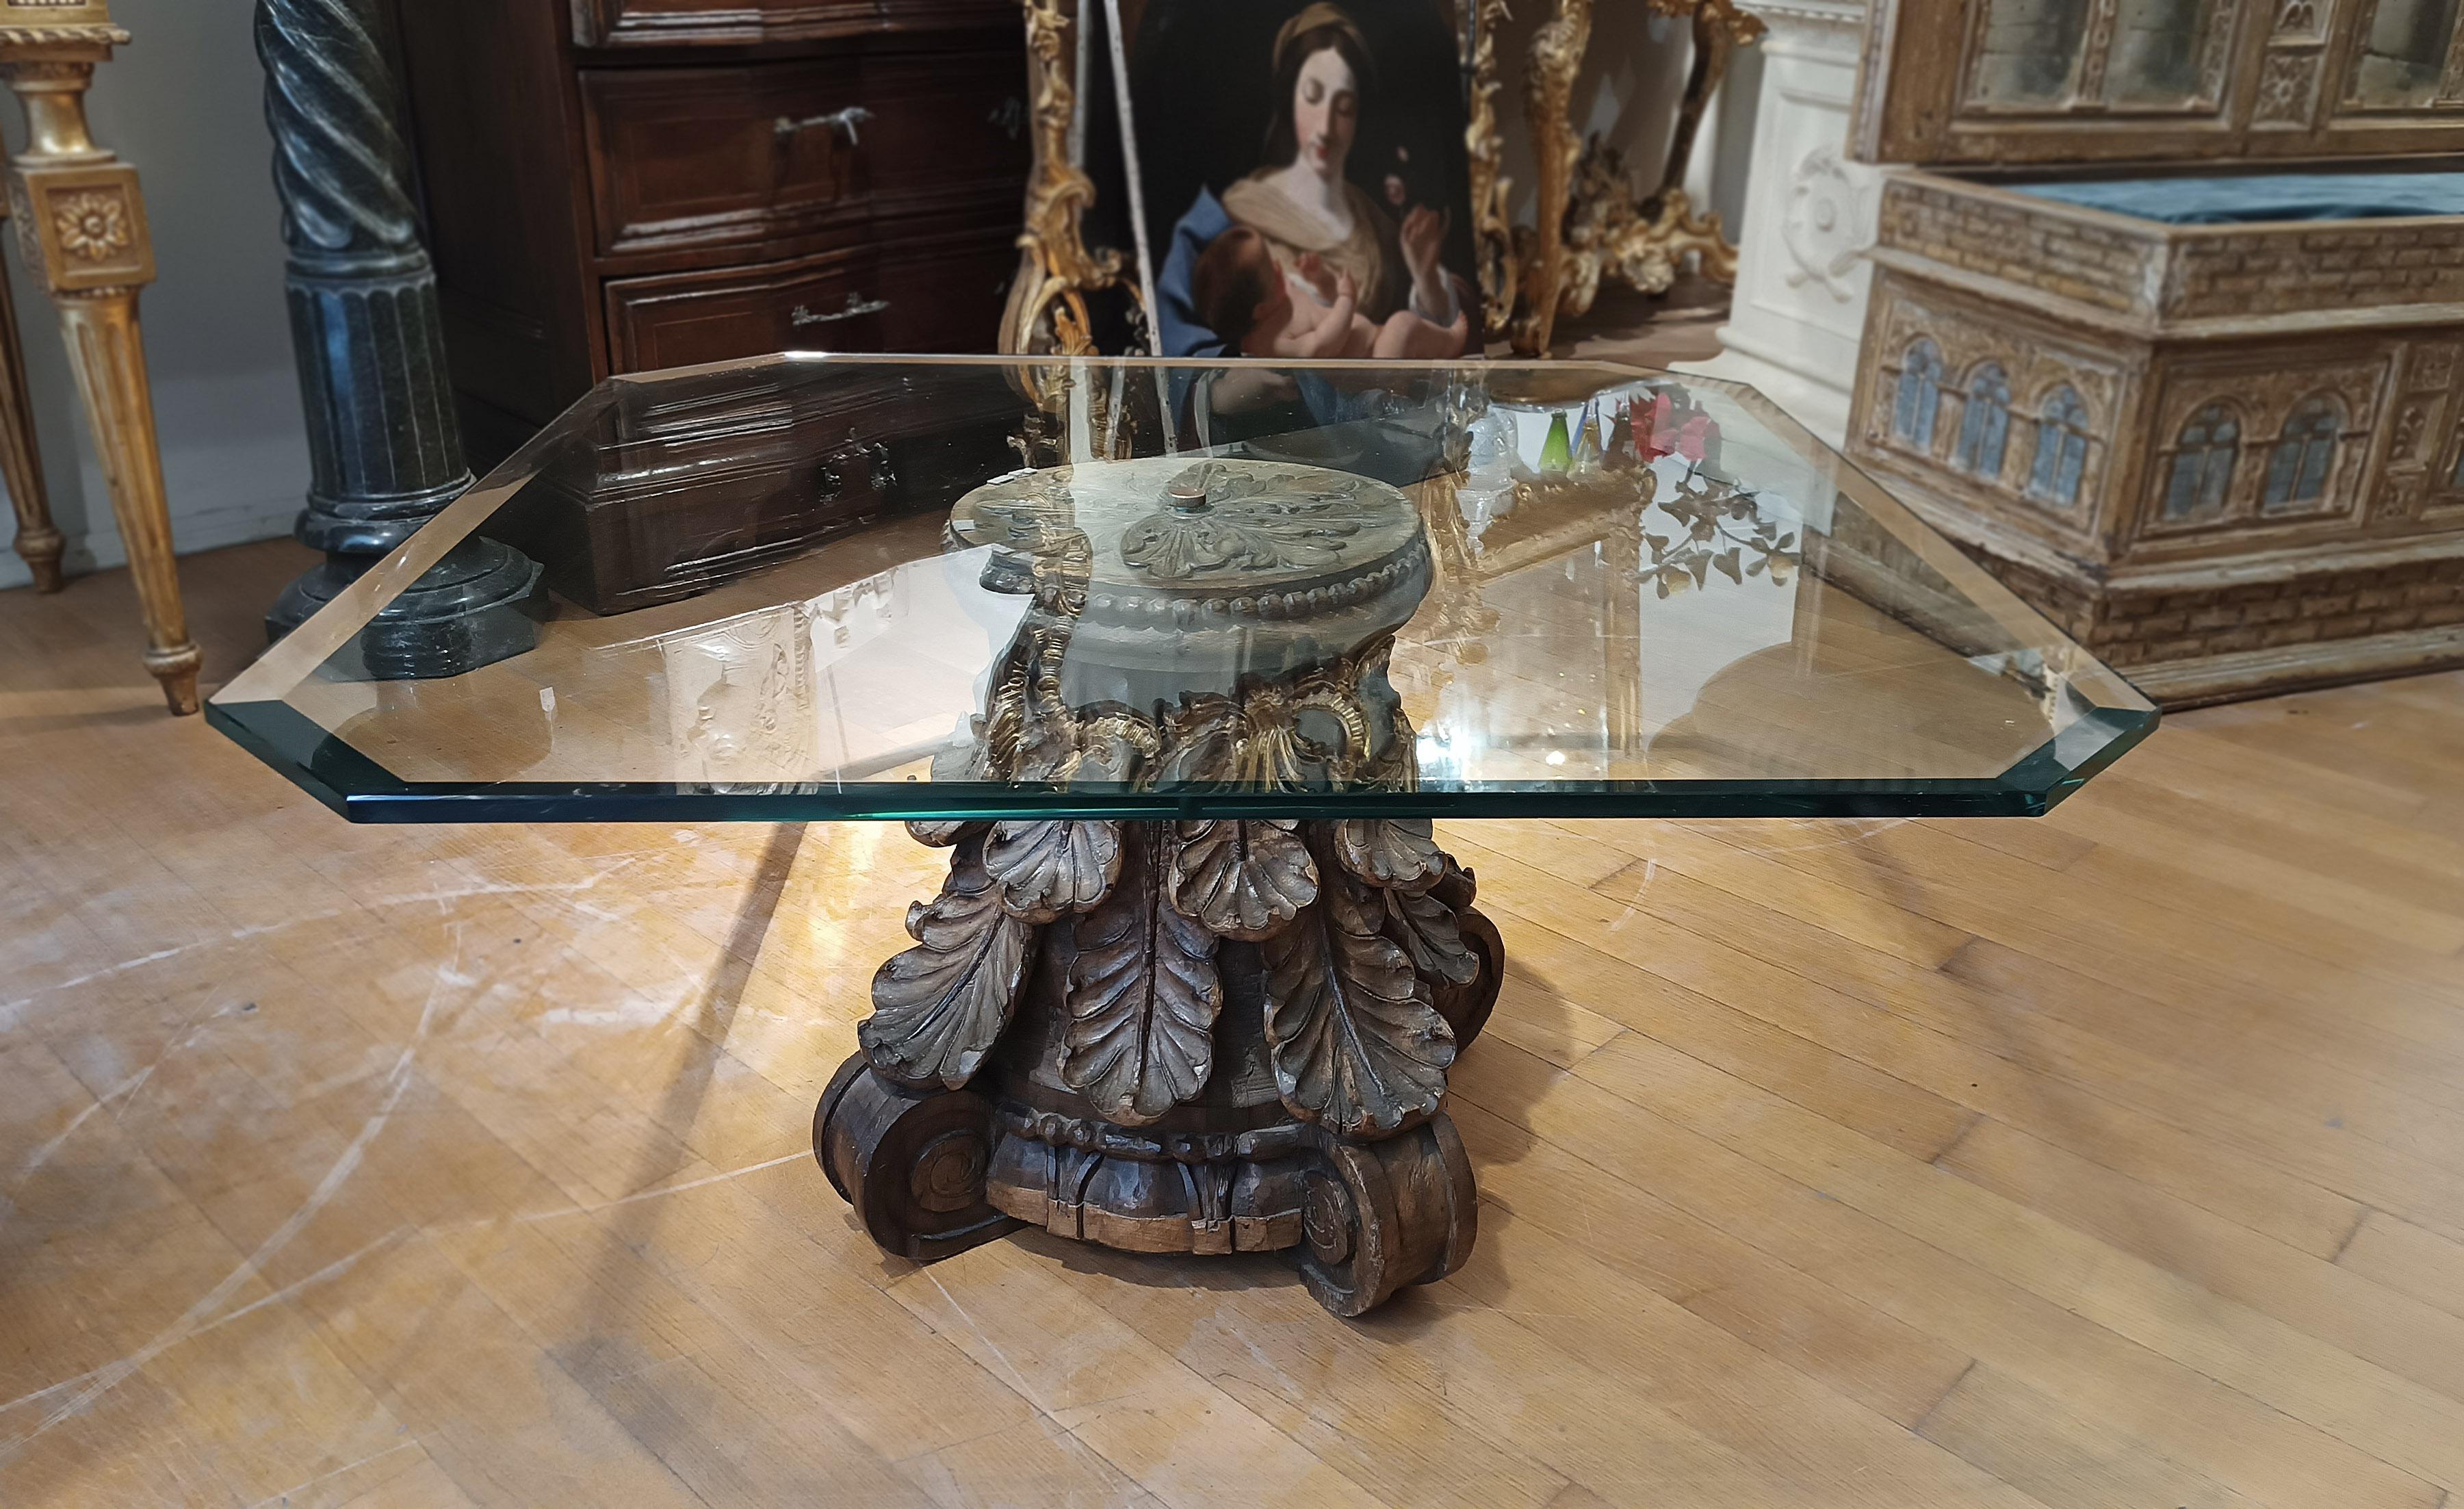 This elegant and particular coffee table is an authentic piece of Italian craftsmanship. The table top is made of tempered and ground crystal glass, giving it a luxurious and refined appearance. The base that supports the table is made up of a